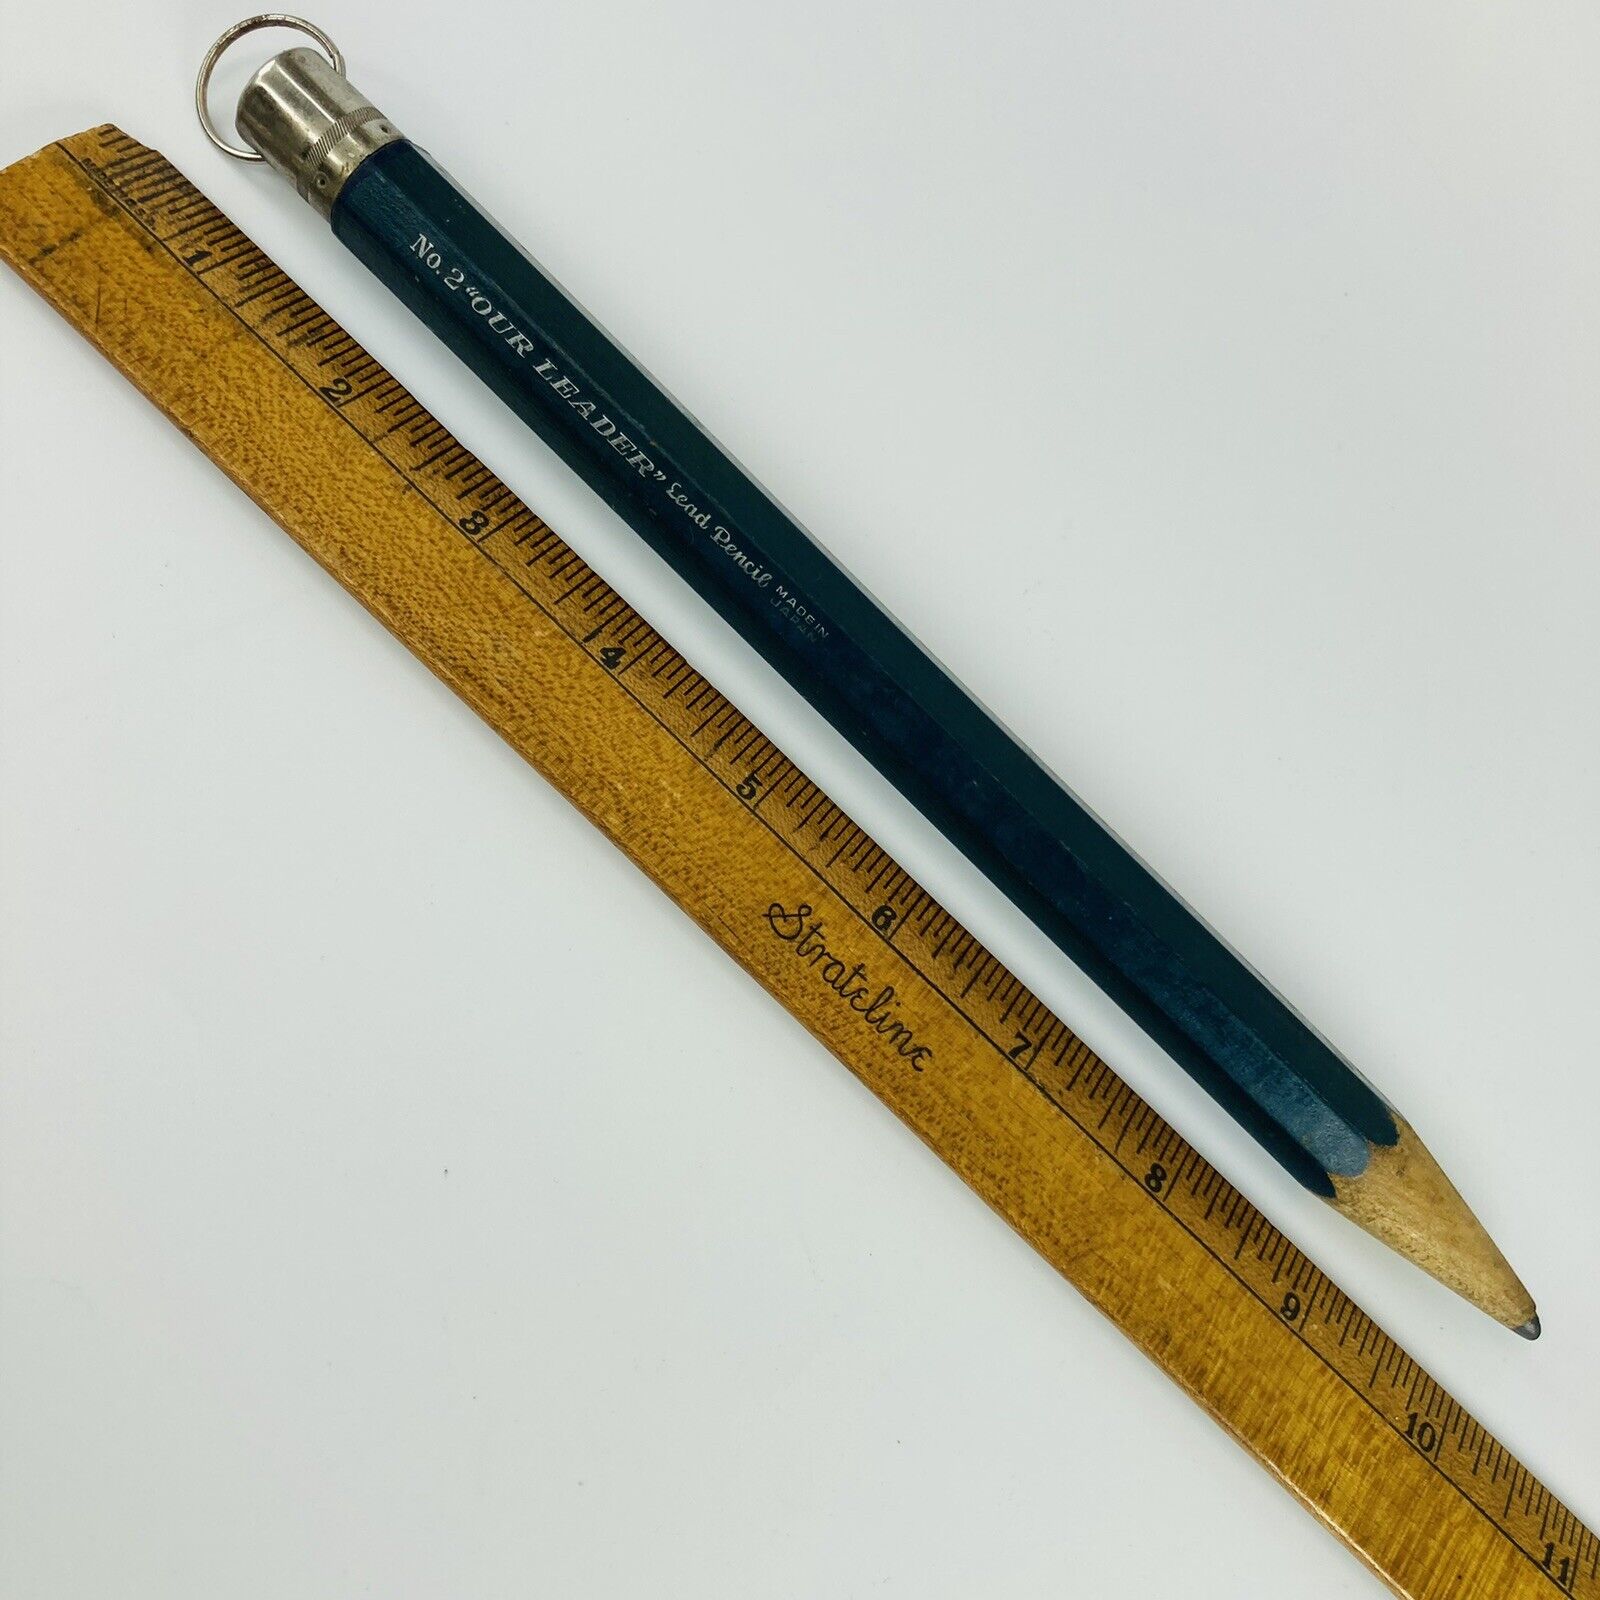 Vtg Giant Oversized OUR LEADER No 2 Pencil Made in Japan 